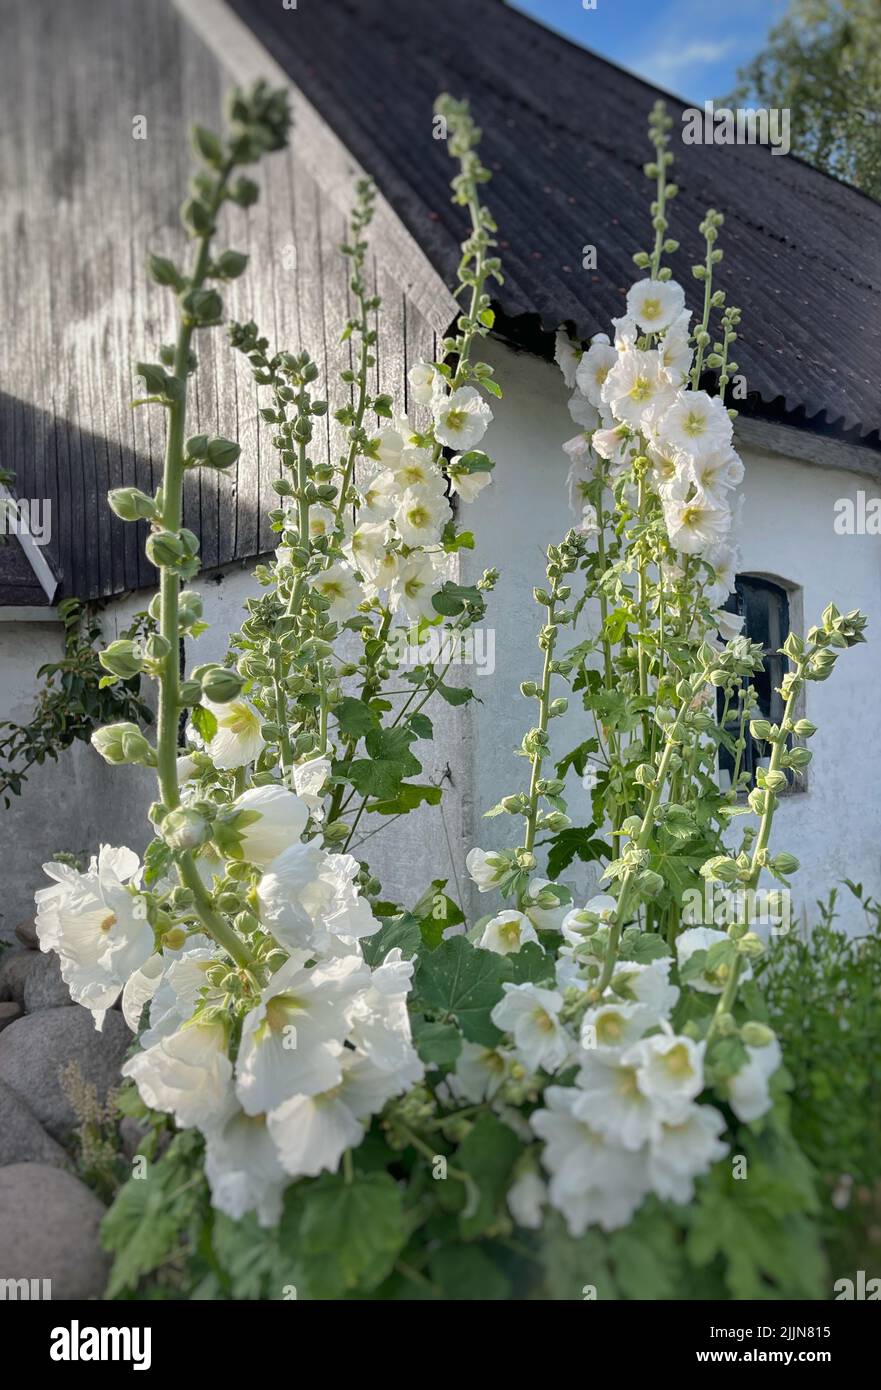 Close-up of white hollyhock flowers growing in front of a house, Samsoe, Jutland, Denmark Stock Photo